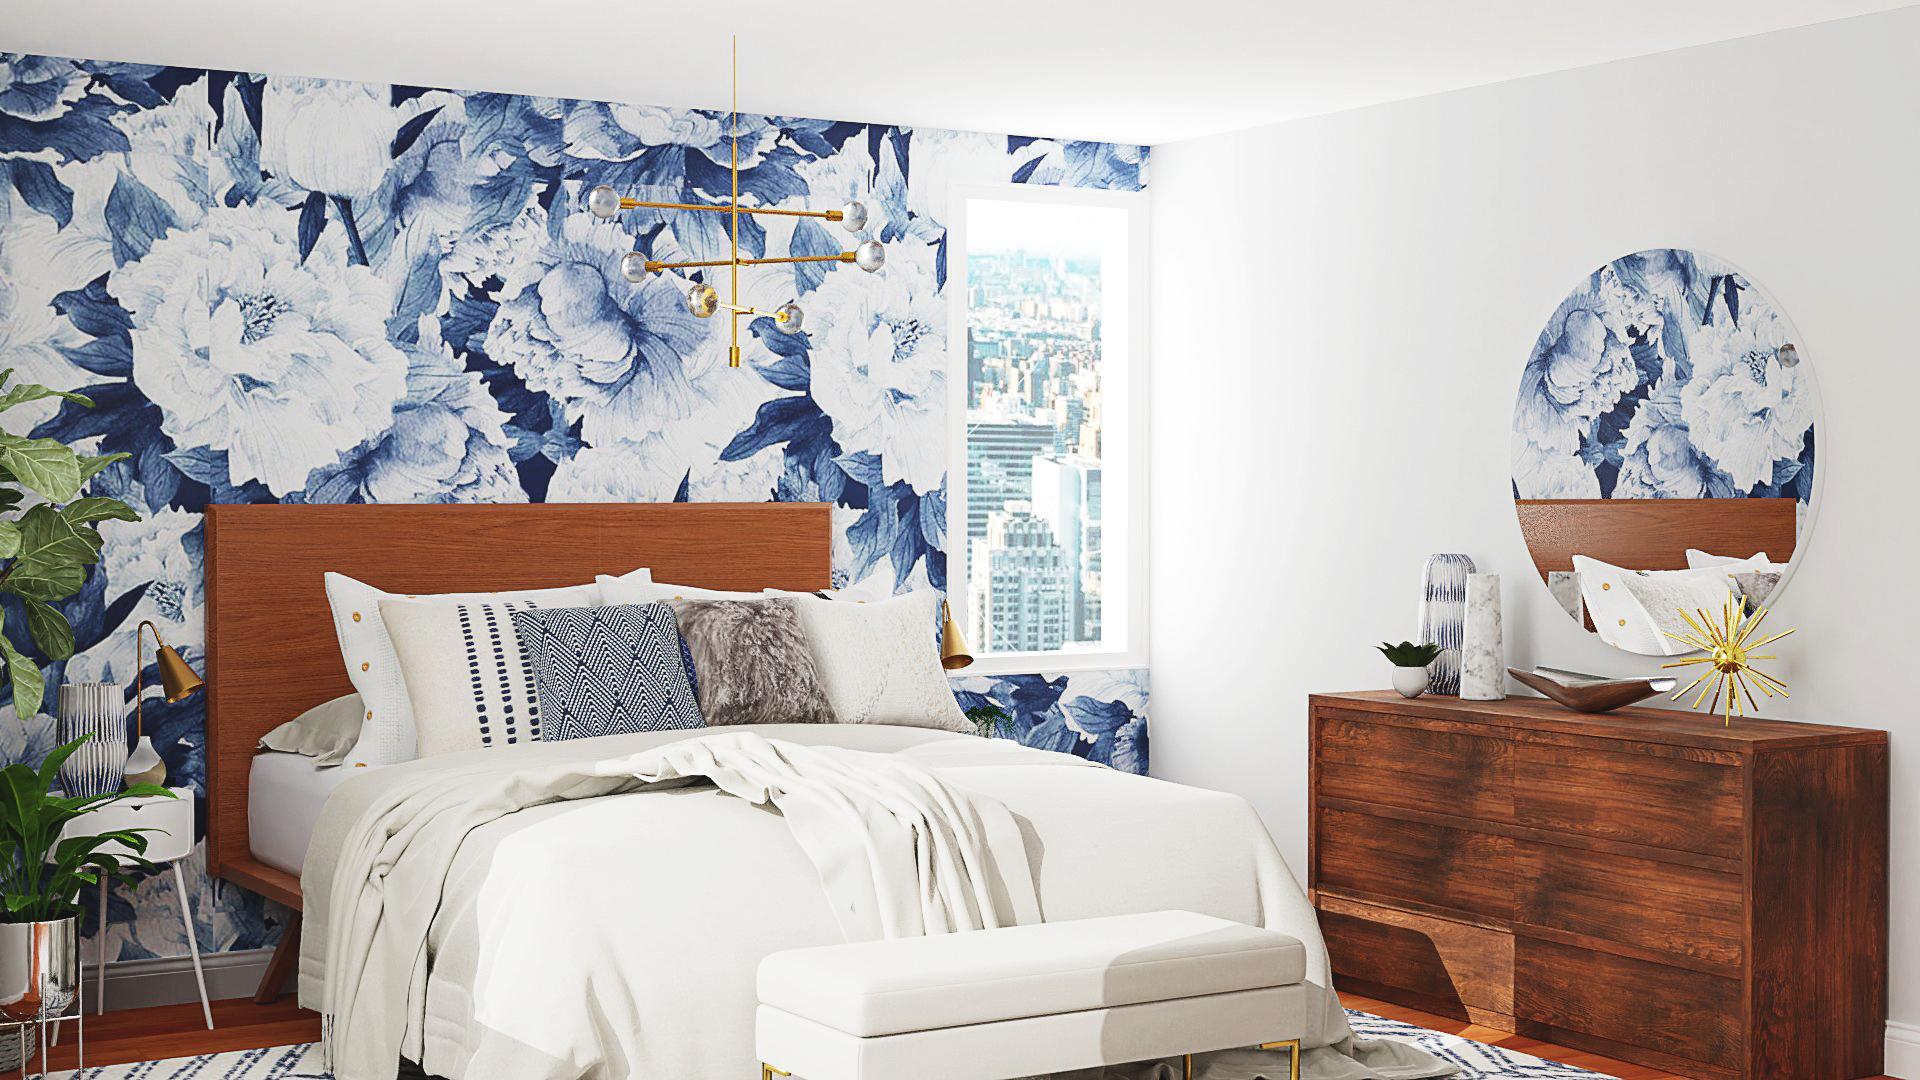 Statement Floral Wallpaper: Mid-Century Contemporary Bedroom